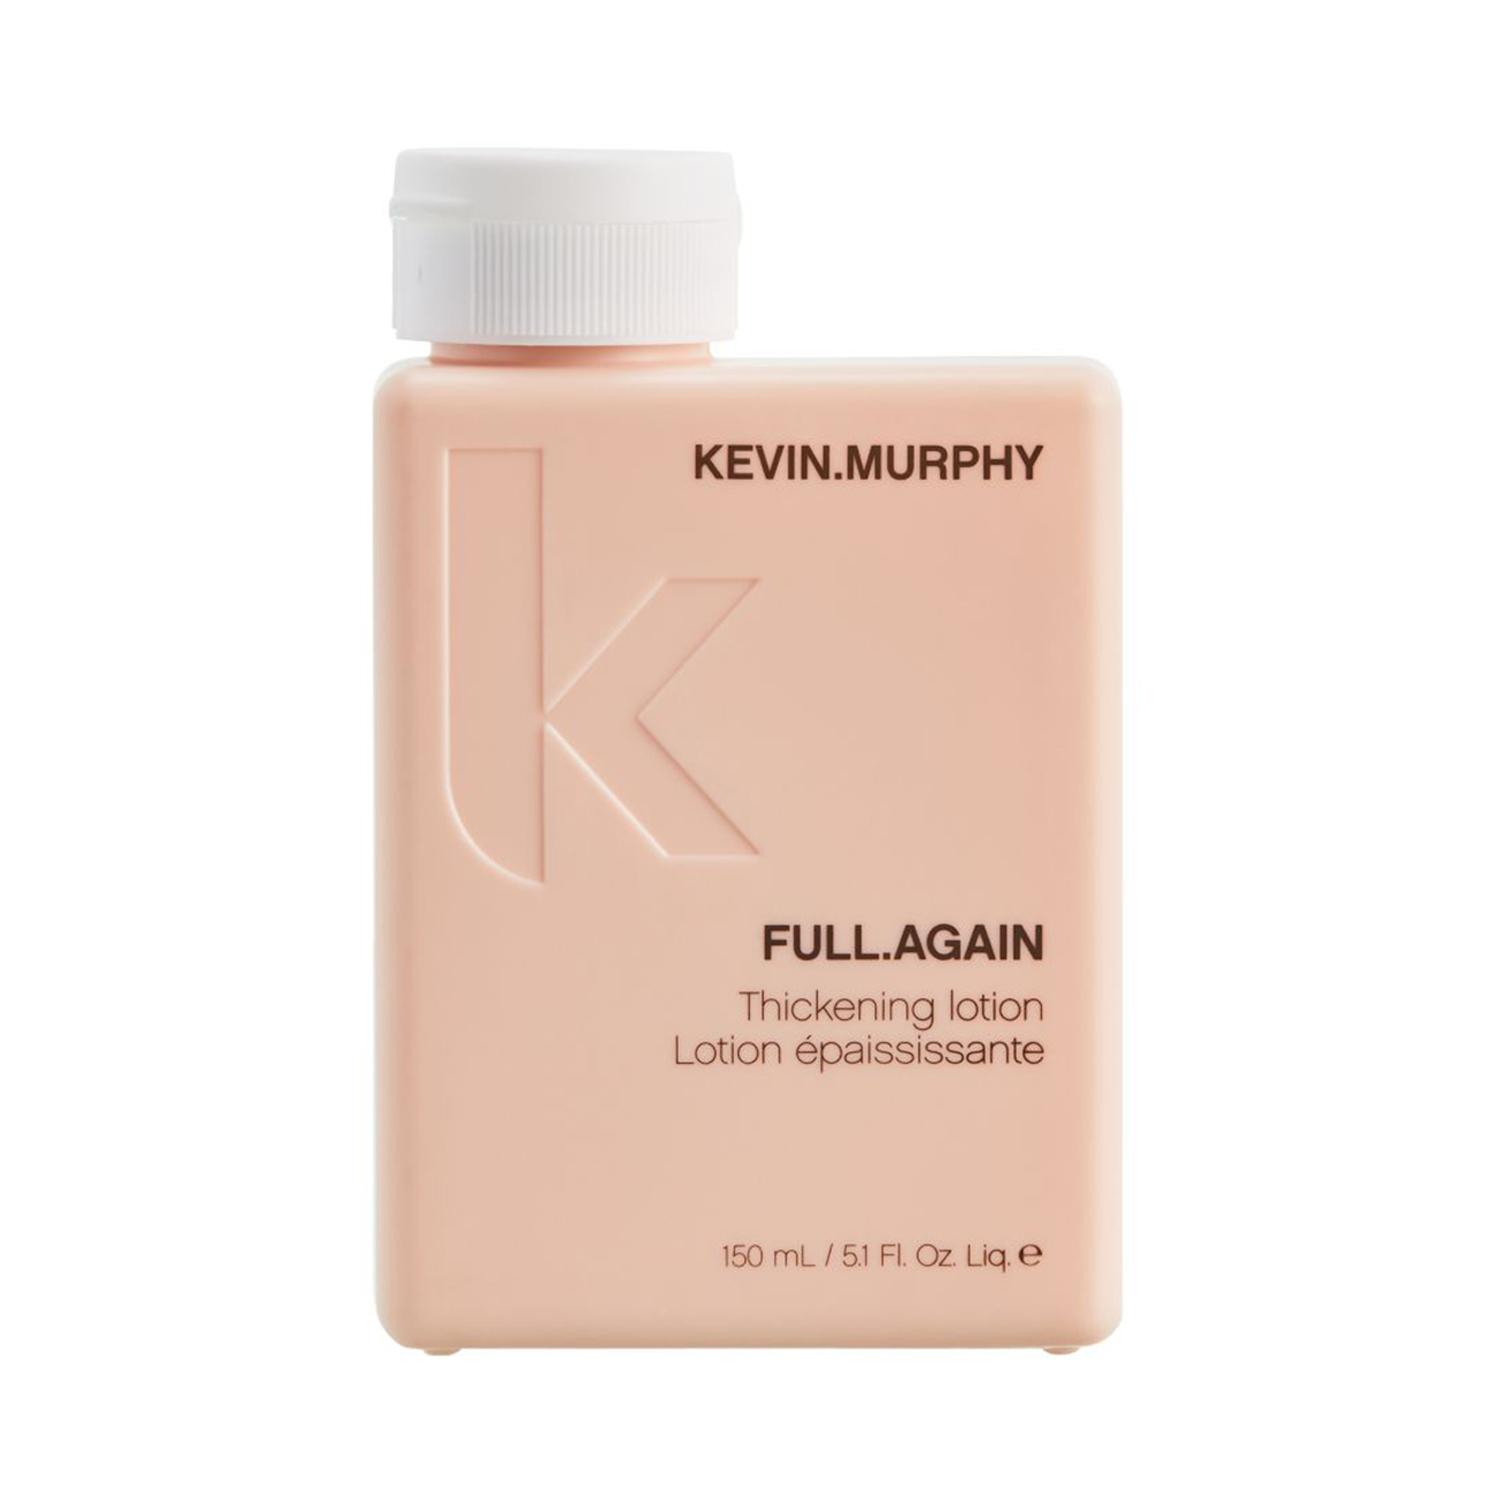 Kevin Murphy Full Again Thickening Lotion (150ml)